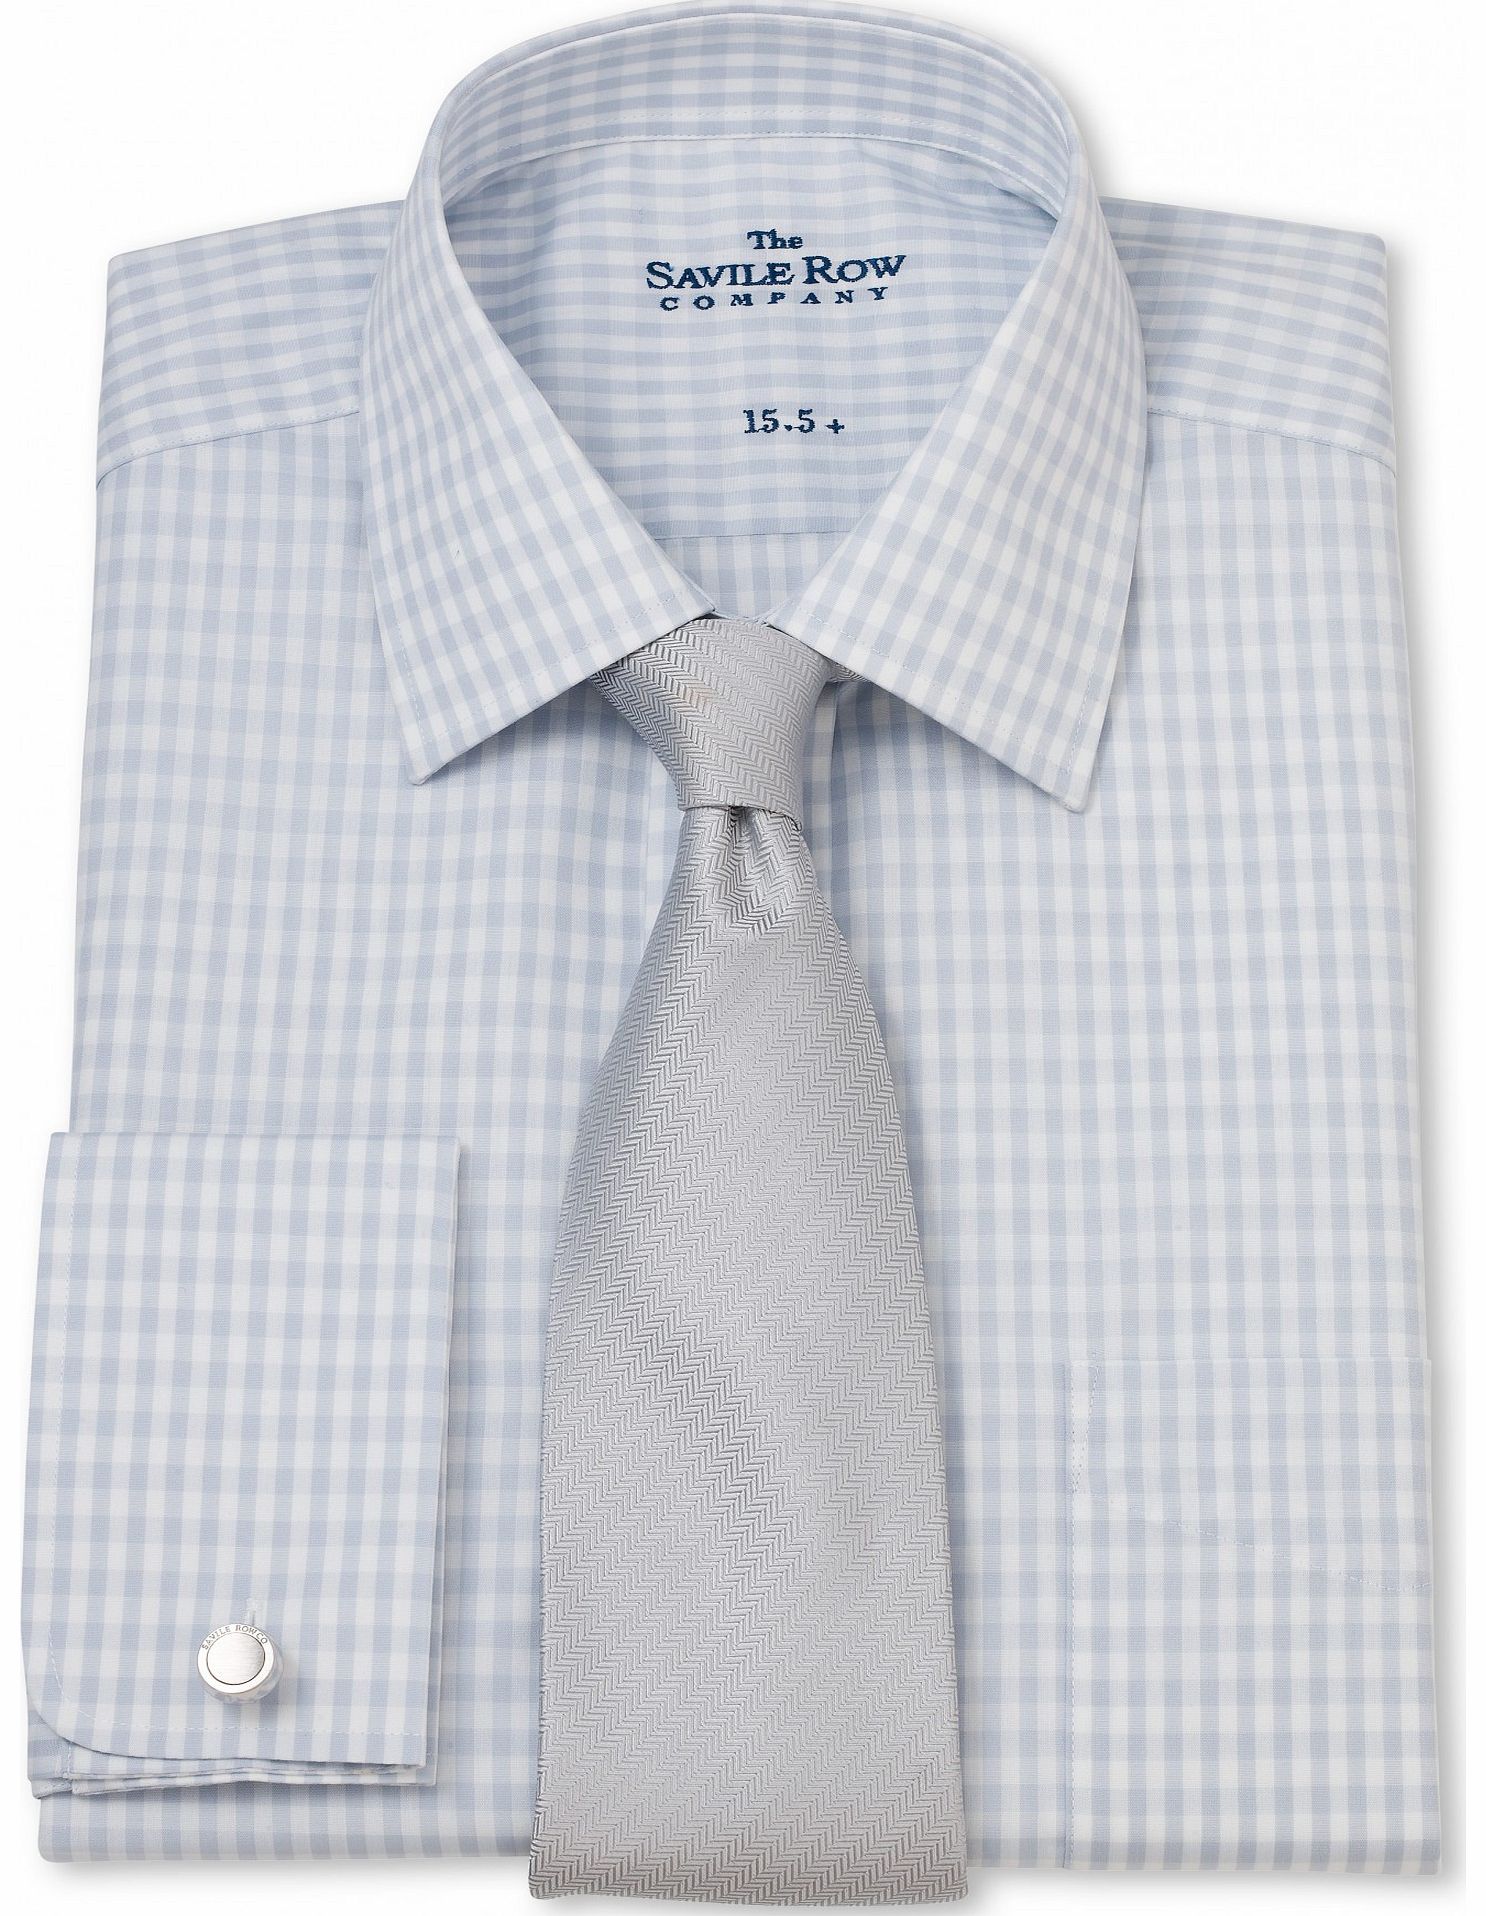 Savile Row Company Grey White Gingham Check Classic Fit Shirt 19